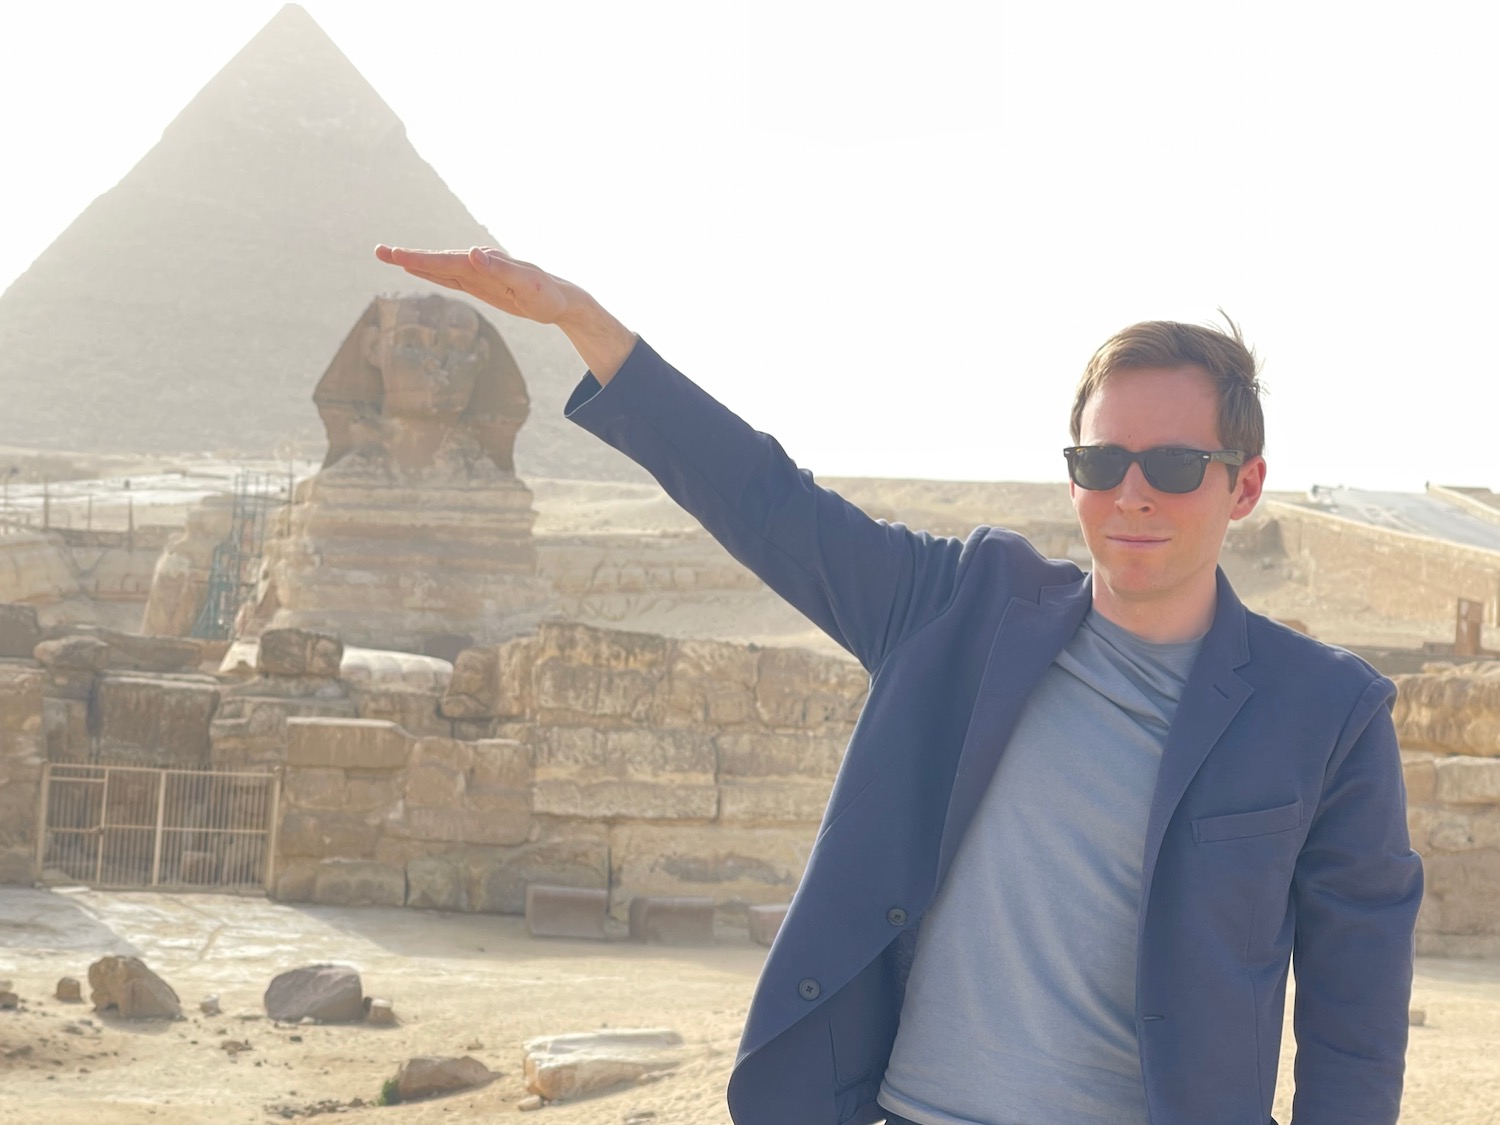 a man in sunglasses holding his hand up in front of a pyramid